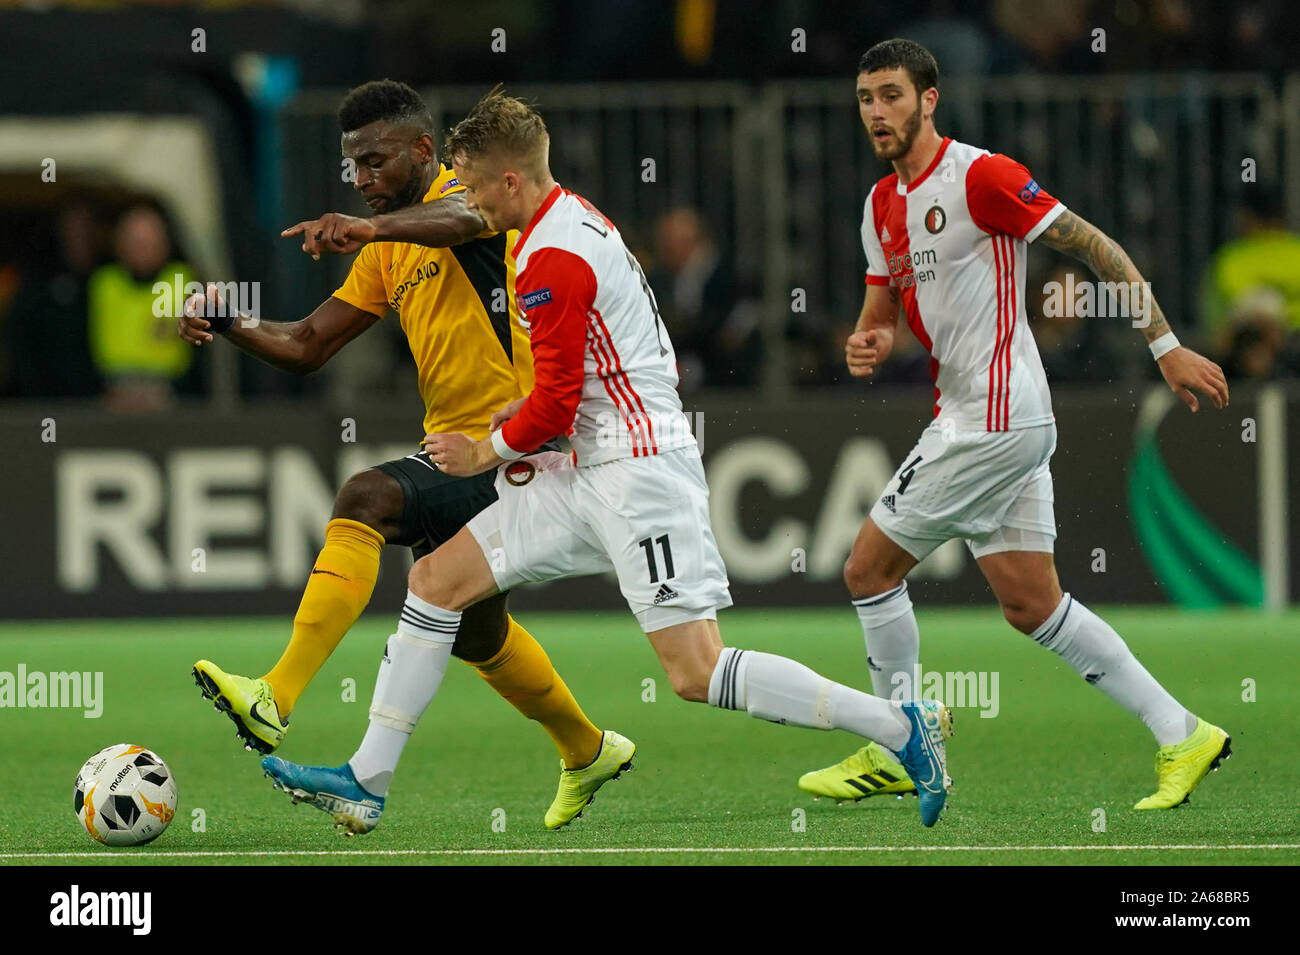 BERNE, SWITZERLAND - OCTOBER 24: Sam Larsson of Feyenoord Rotterdam (right)  tackles Jean Pierre Nsamé of BSC Young Boys (left) during the Europa League  Group G Stage football match between BSC Young